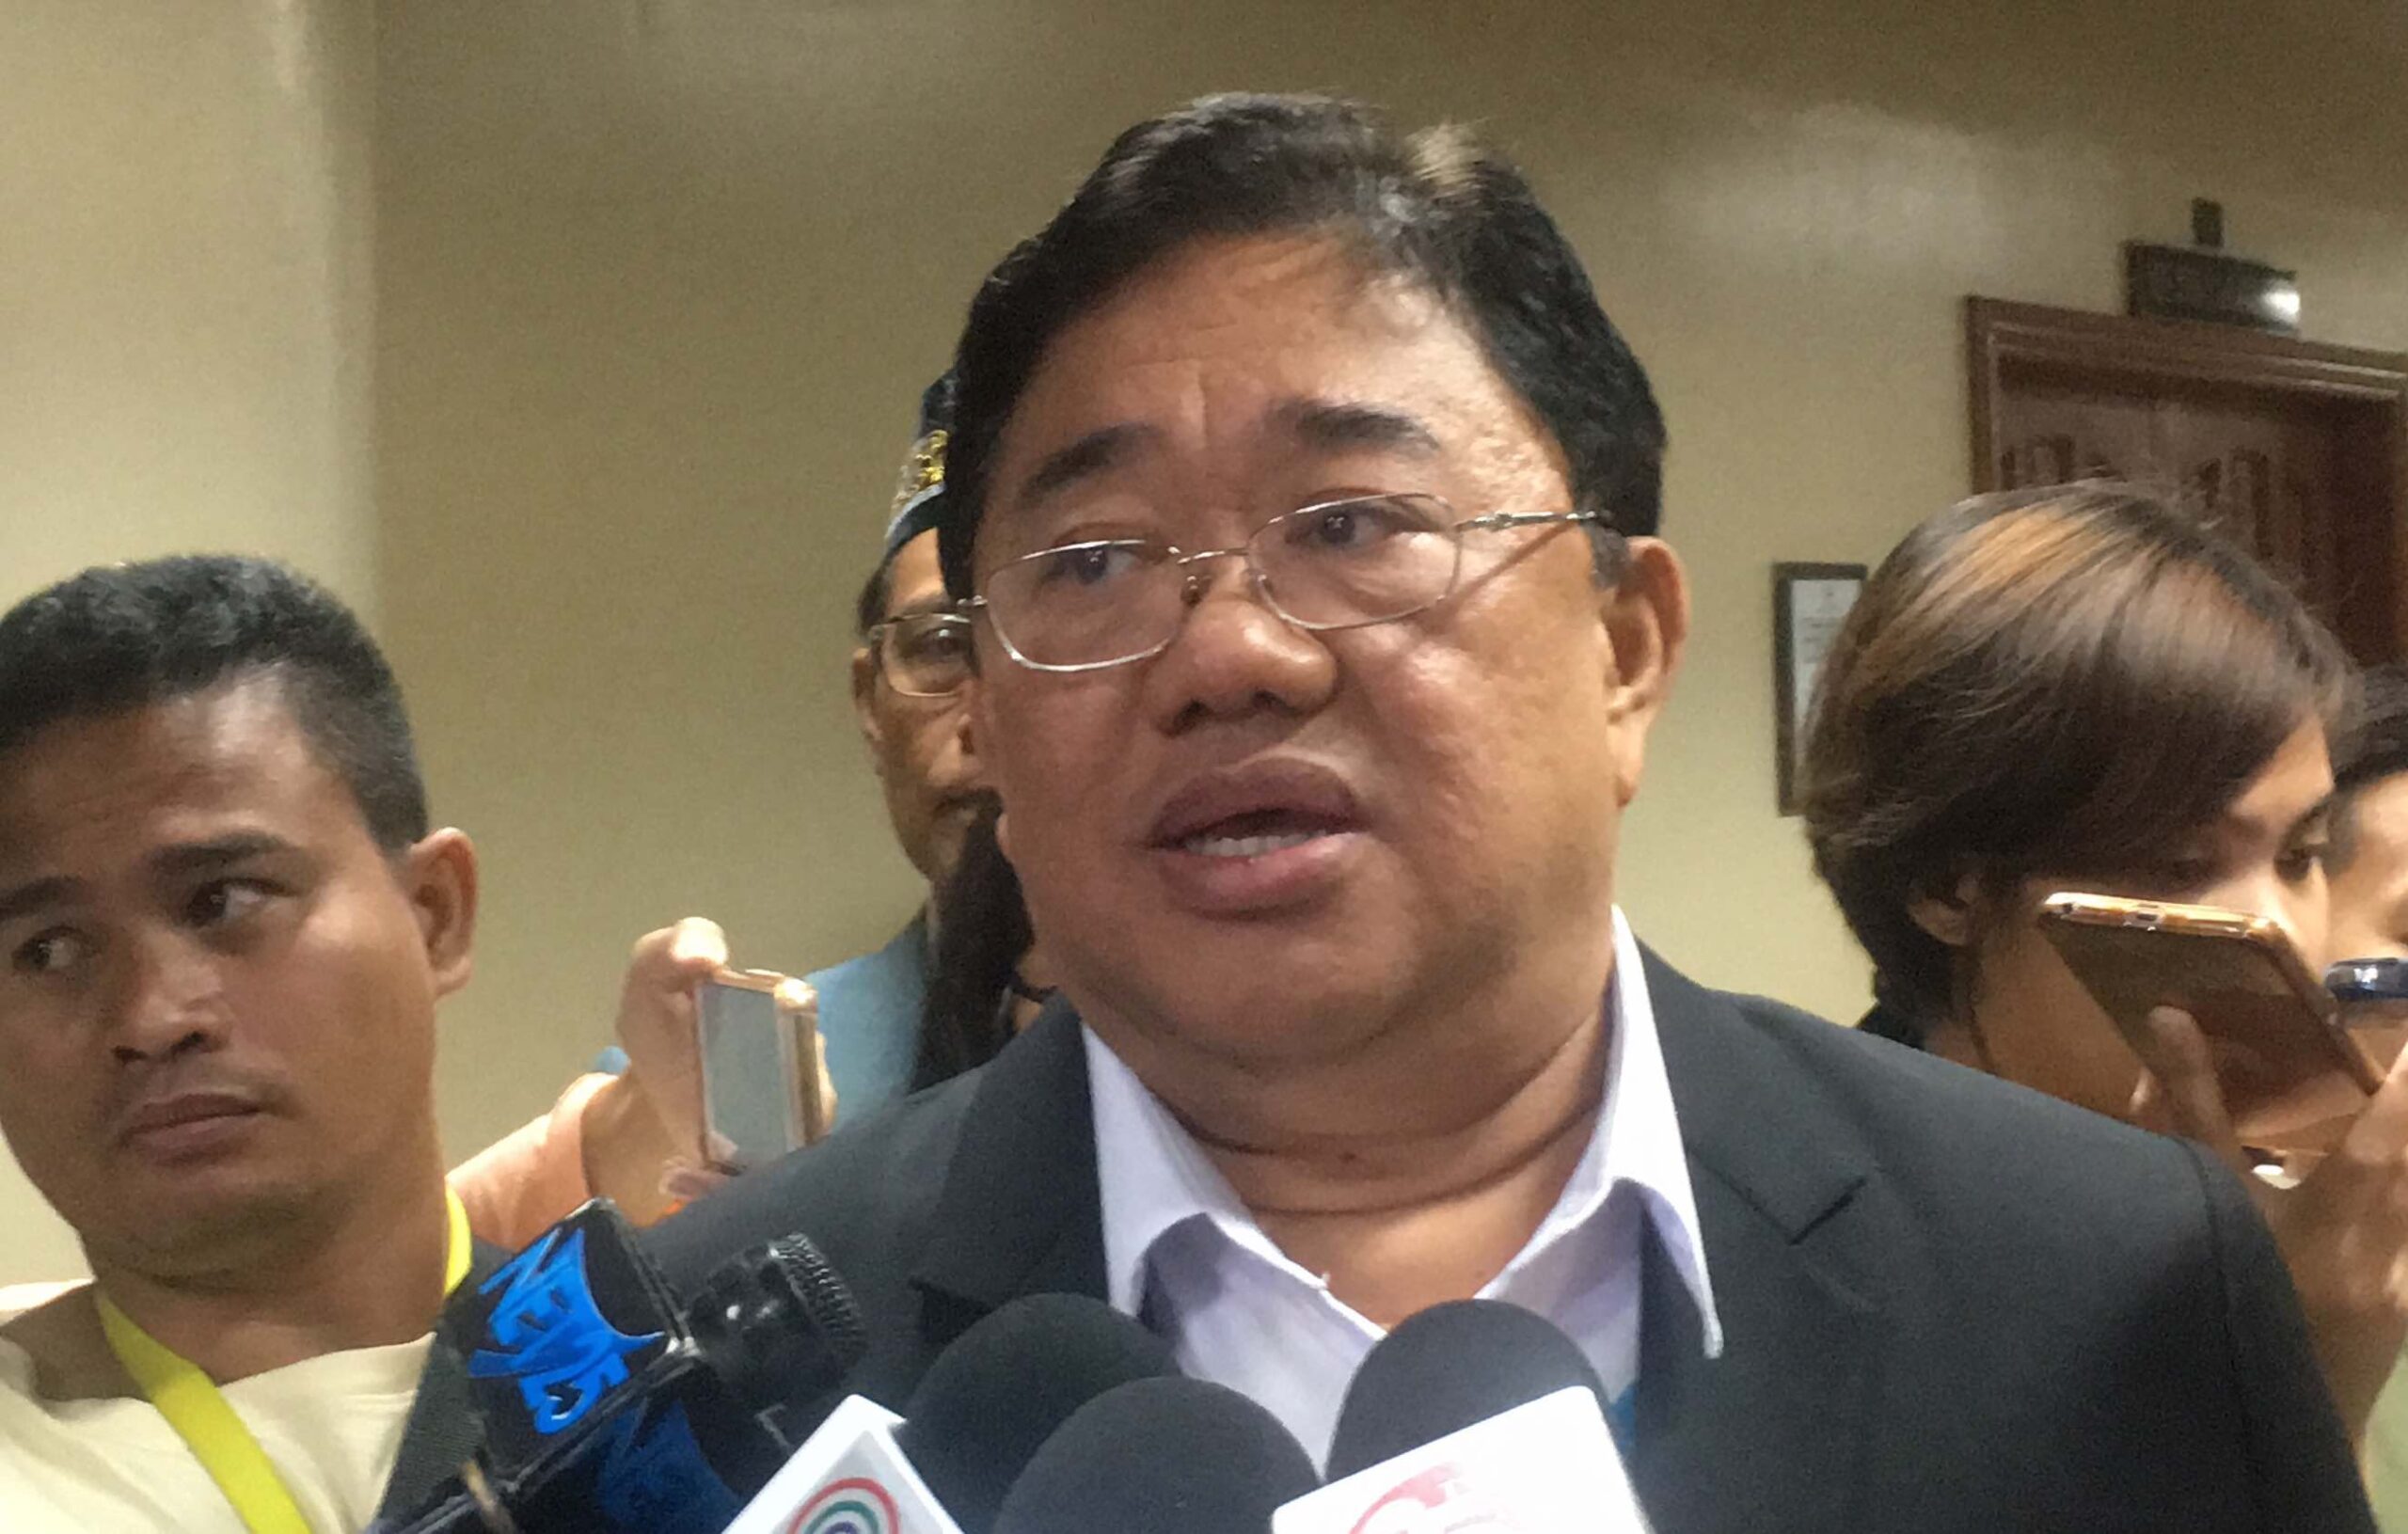 CA bypasses agrarian reform chief over lack of track record